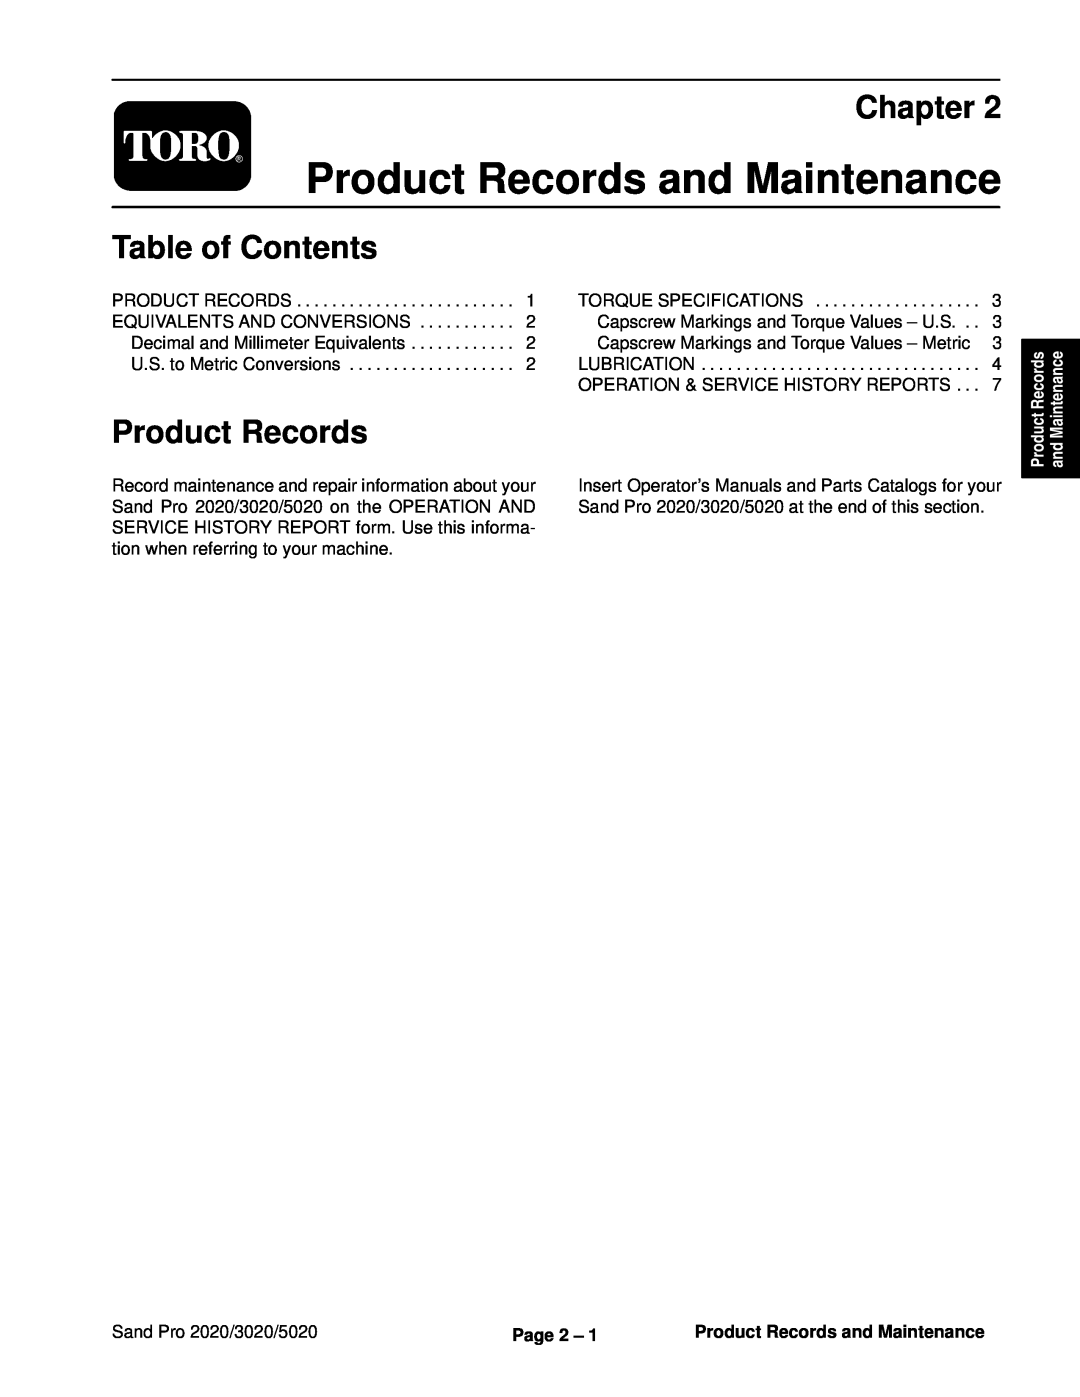 Toro service manual Product Records and Maintenance, Chapter, Table of Contents, Sand Pro 2020/3020/5020, Page 2 